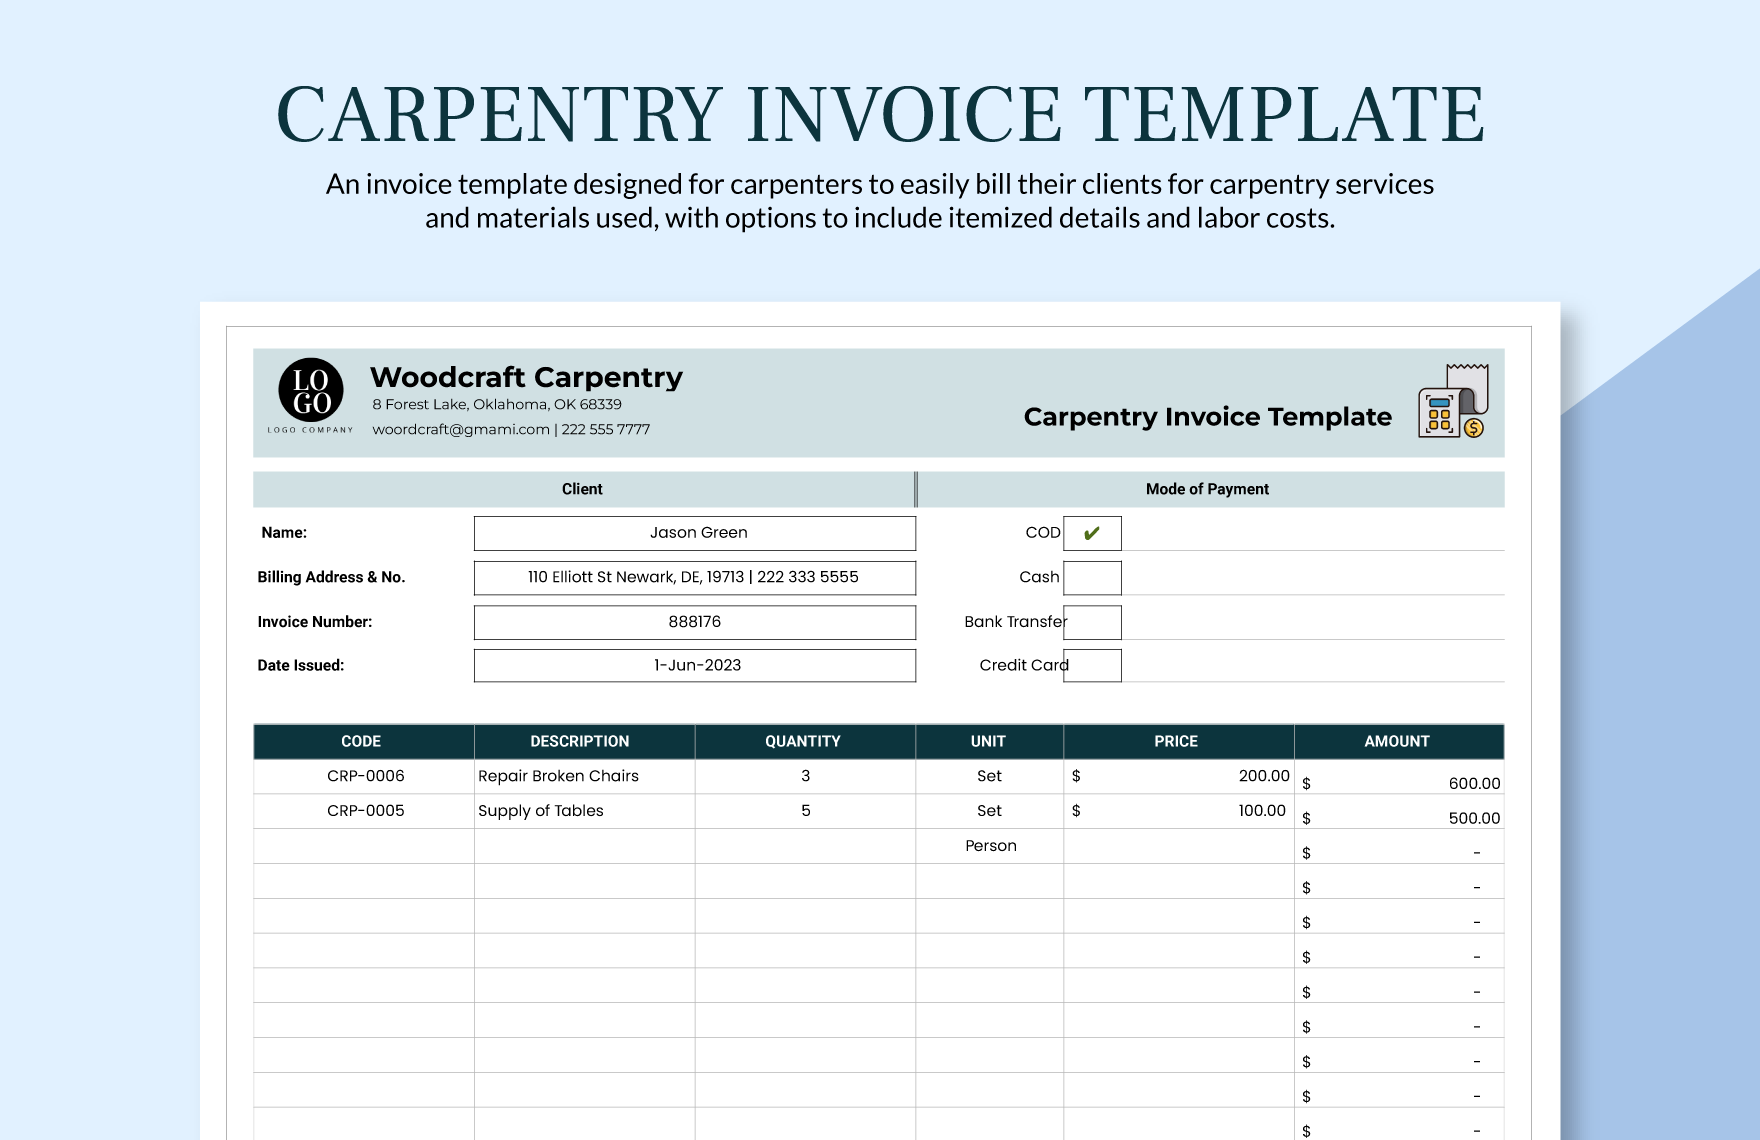 Carpentry Invoice Template in Word, Google Docs, Excel, PDF, Google Sheets, Illustrator, PSD, Apple Pages, InDesign, Apple Numbers